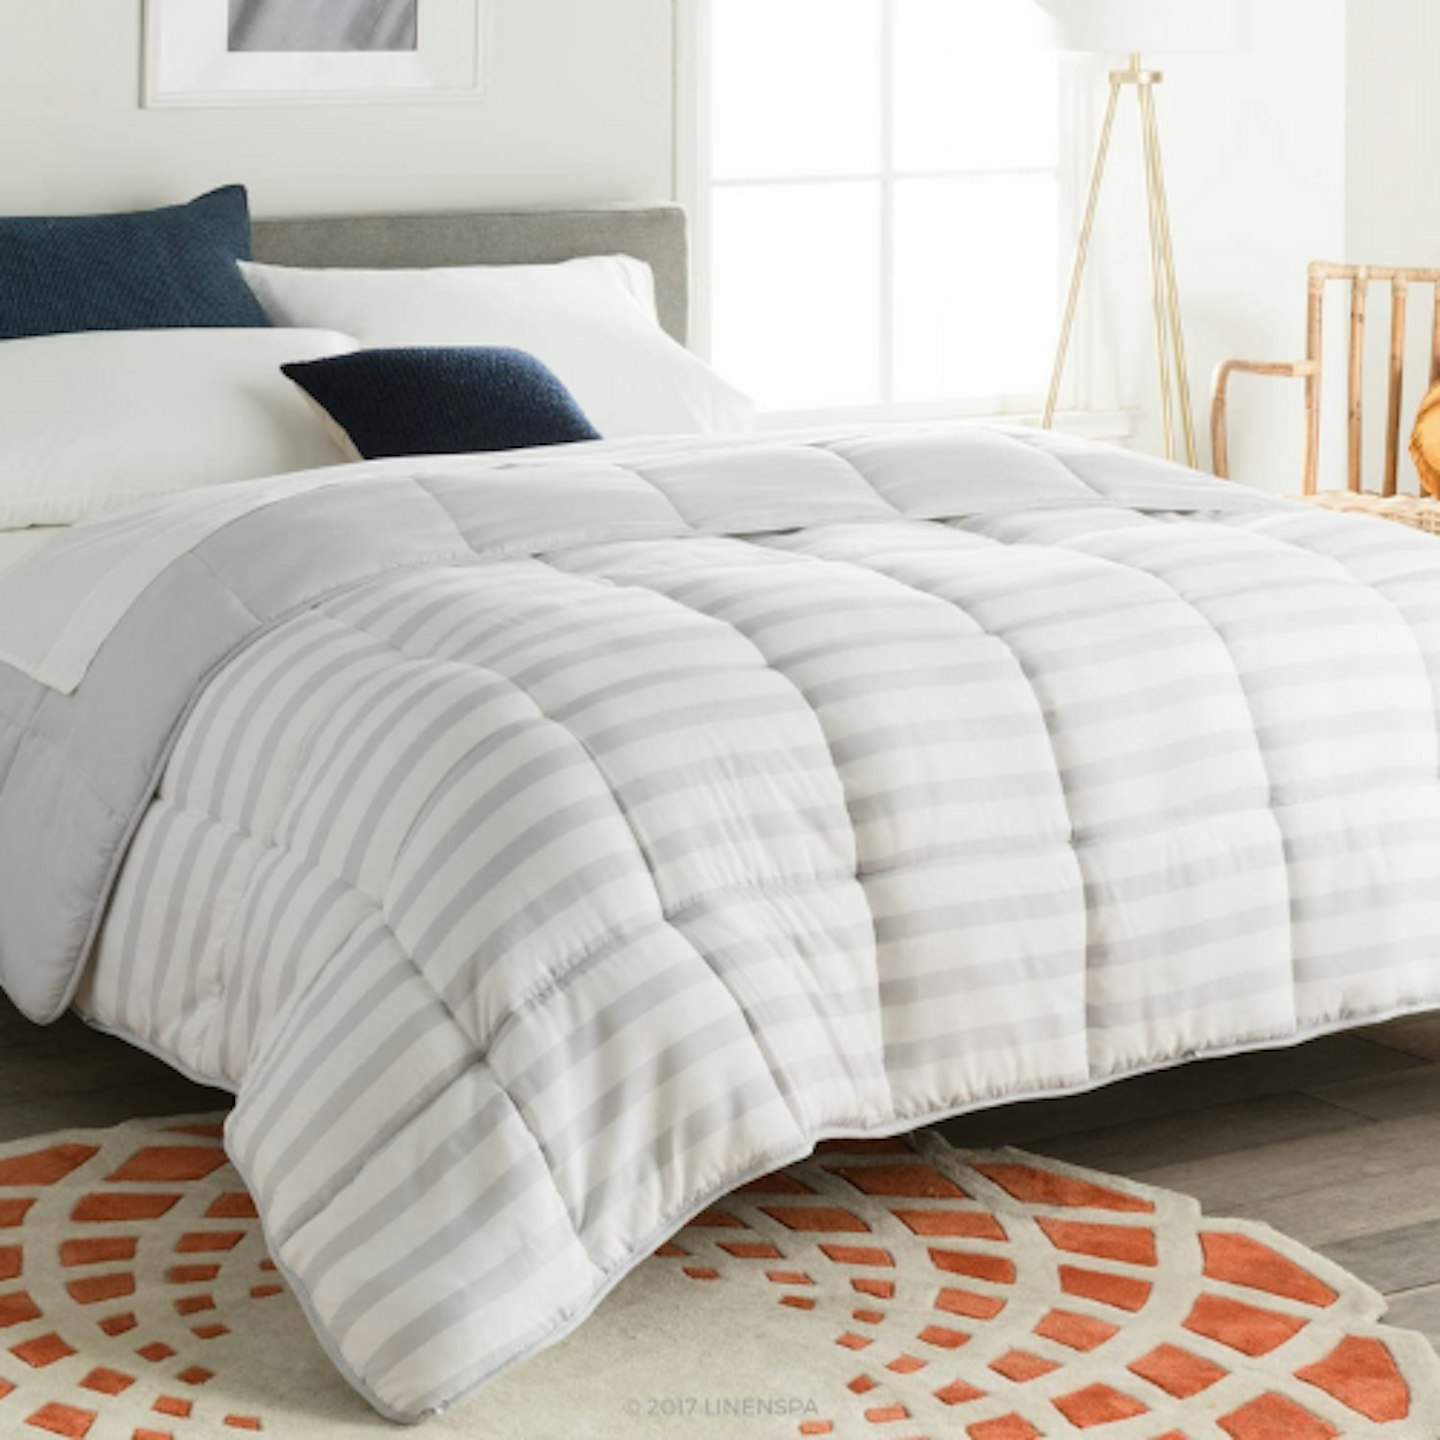 Linenspa All-Season Reversible Down Alternative Quilted Comforter